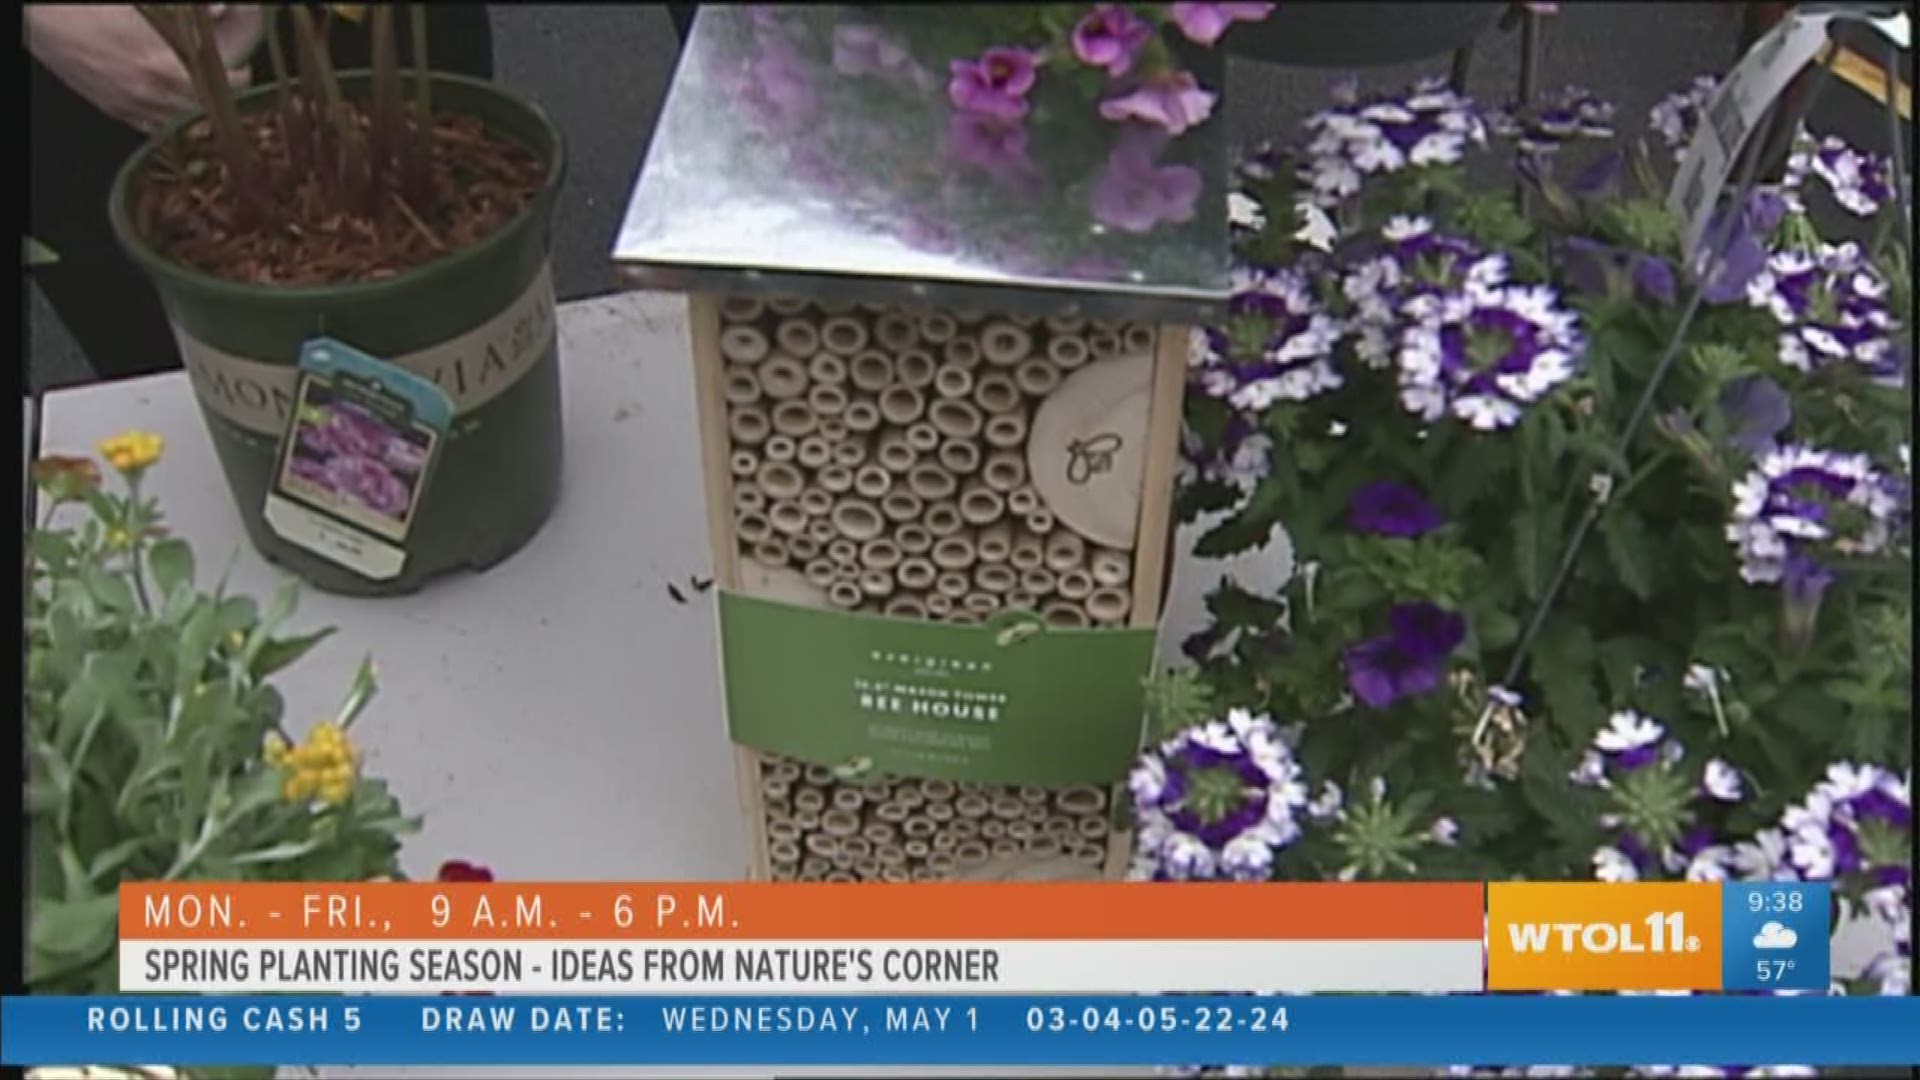 Jenny Amstutz from Nature's Corner has some great spring planting ideas for those looking for inspiration!